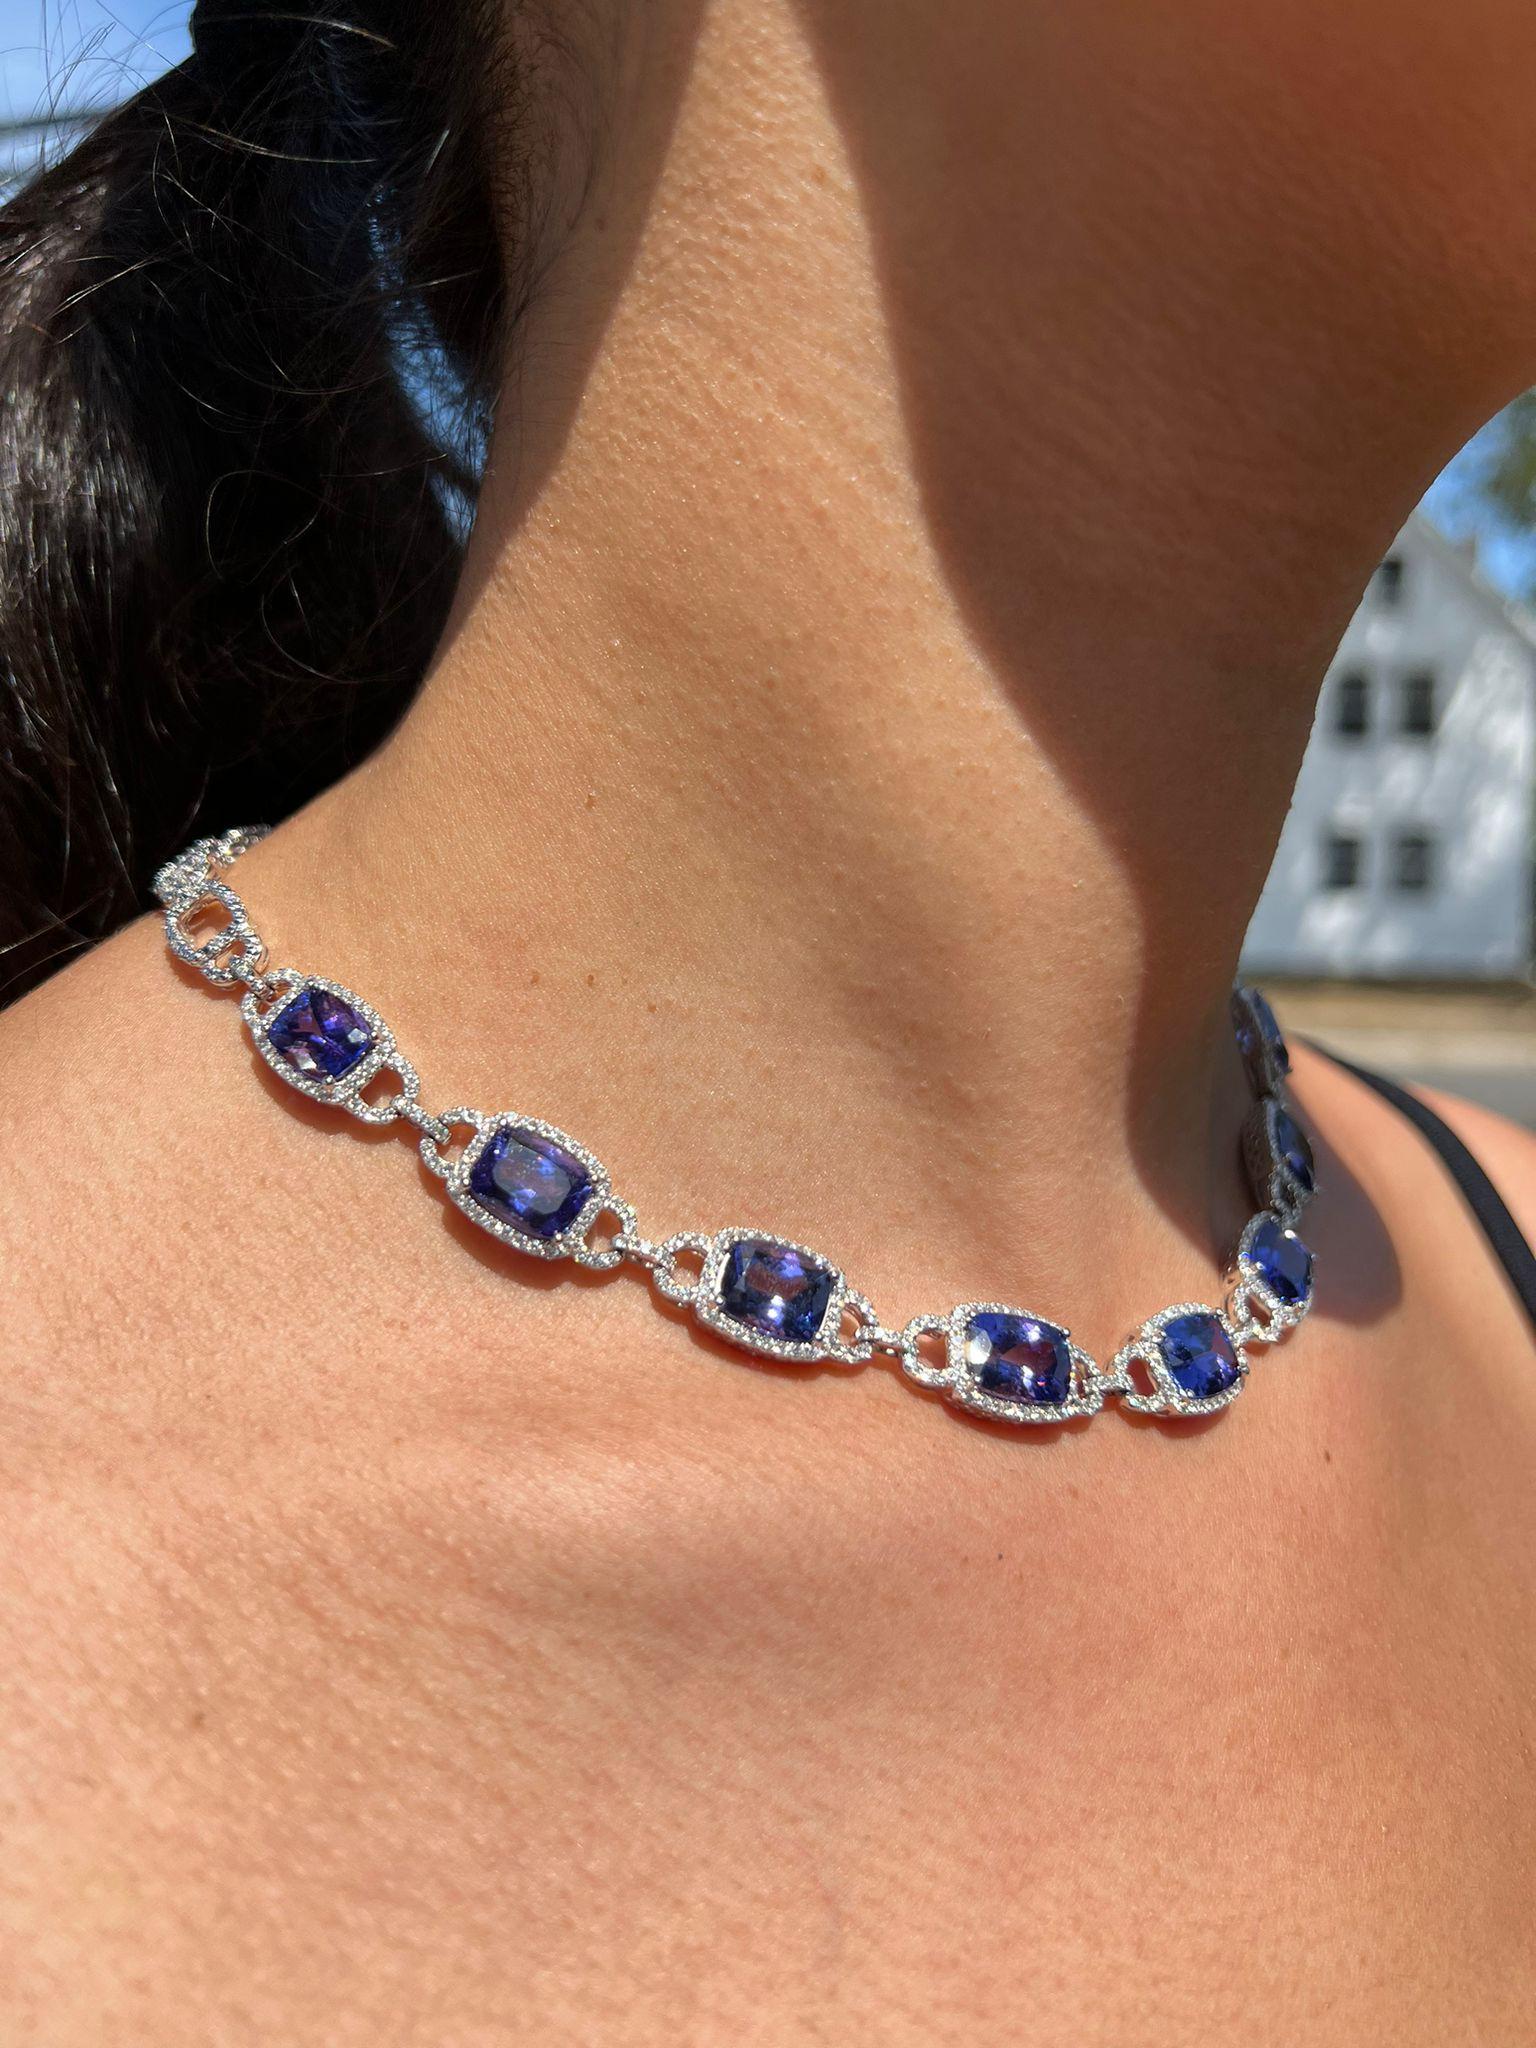 Exquisite 14 Karat White Gold Cushion Tanzanite Necklace - Vivid AAA Quality For Sale 4